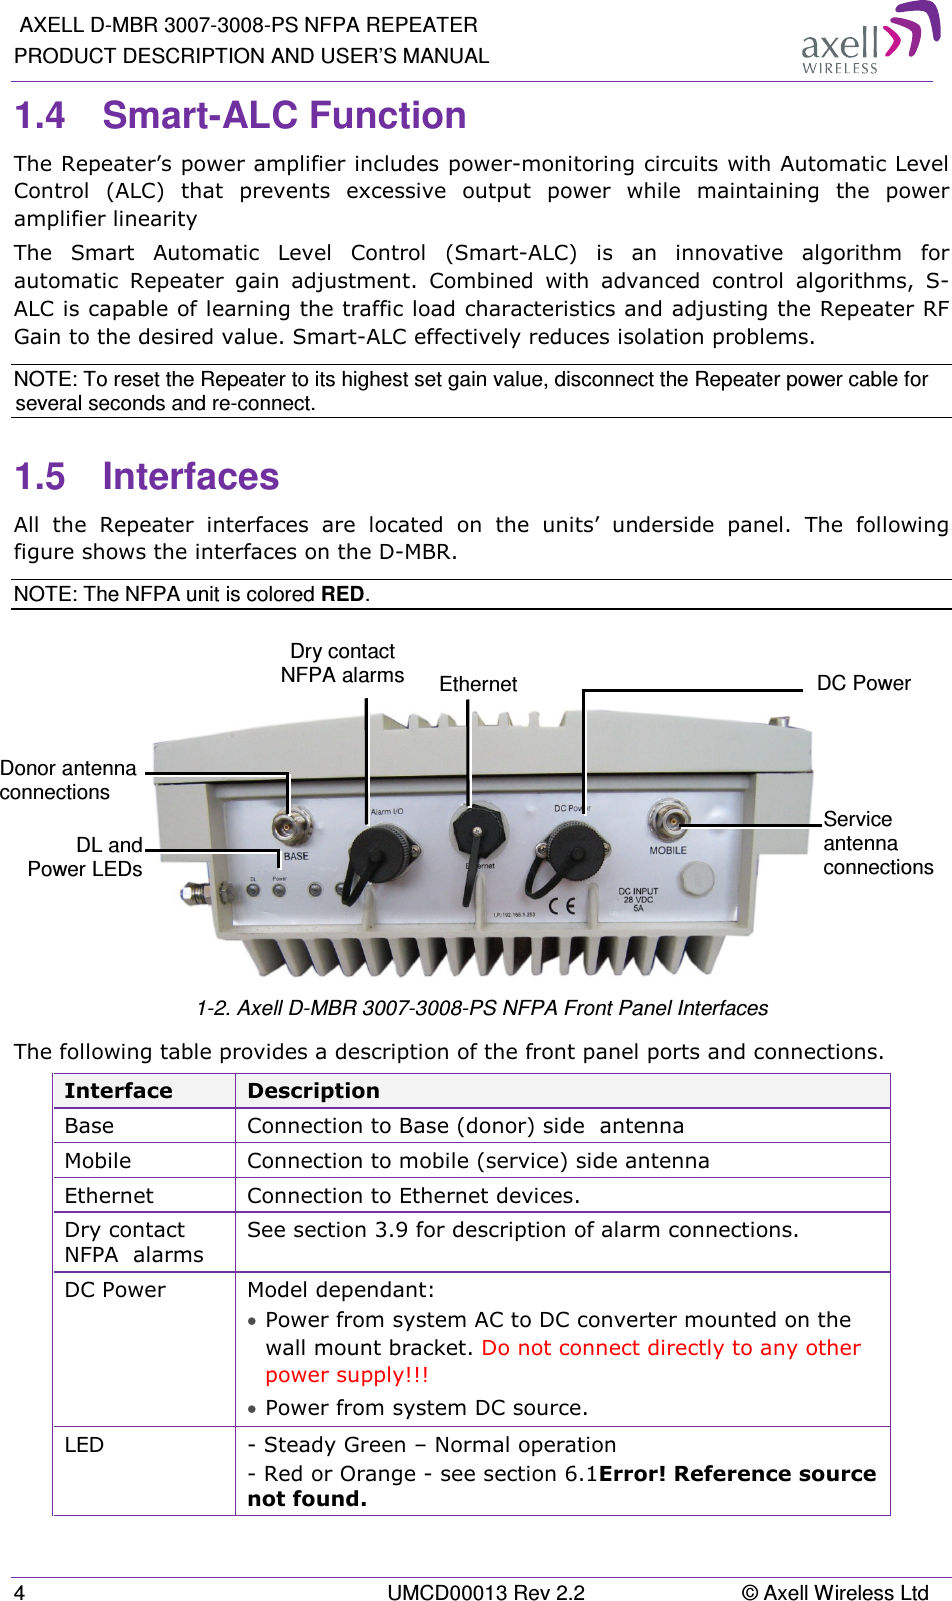  AXELL D-MBR 3007-3008-PS NFPA REPEATER PRODUCT DESCRIPTION AND USER’S MANUAL 4  UMCD00013 Rev 2.2  © Axell Wireless Ltd 1.4  Smart-ALC Function  The Repeater’s power amplifier includes power-monitoring circuits with Automatic Level Control  (ALC)  that  prevents  excessive  output  power  while  maintaining  the  power amplifier linearity  The  Smart  Automatic  Level  Control  (Smart-ALC)  is  an  innovative  algorithm  for automatic  Repeater  gain  adjustment.  Combined  with  advanced  control  algorithms,  S-ALC is capable of learning the traffic load characteristics and adjusting the Repeater RF Gain to the desired value. Smart-ALC effectively reduces isolation problems. NOTE: To reset the Repeater to its highest set gain value, disconnect the Repeater power cable for several seconds and re-connect. 1.5  Interfaces All  the  Repeater  interfaces  are  located  on  the  units’  underside  panel.  The  following figure shows the interfaces on the D-MBR. NOTE: The NFPA unit is colored RED.     1-2. Axell D-MBR 3007-3008-PS NFPA Front Panel Interfaces The following table provides a description of the front panel ports and connections.  Interface  Description Base  Connection to Base (donor) side  antenna  Mobile  Connection to mobile (service) side antenna Ethernet   Connection to Ethernet devices. Dry contact NFPA  alarms See section  3.9 for description of alarm connections. DC Power  Model dependant:  • Power from system AC to DC converter mounted on the wall mount bracket. Do not connect directly to any other power supply!!! • Power from system DC source. LED  - Steady Green – Normal operation - Red or Orange - see section  6.1Error! Reference source not found. Service antenna connections  DC Power   Donor antenna connections  DL and Power LEDsEthernet Dry contact  NFPA alarms  